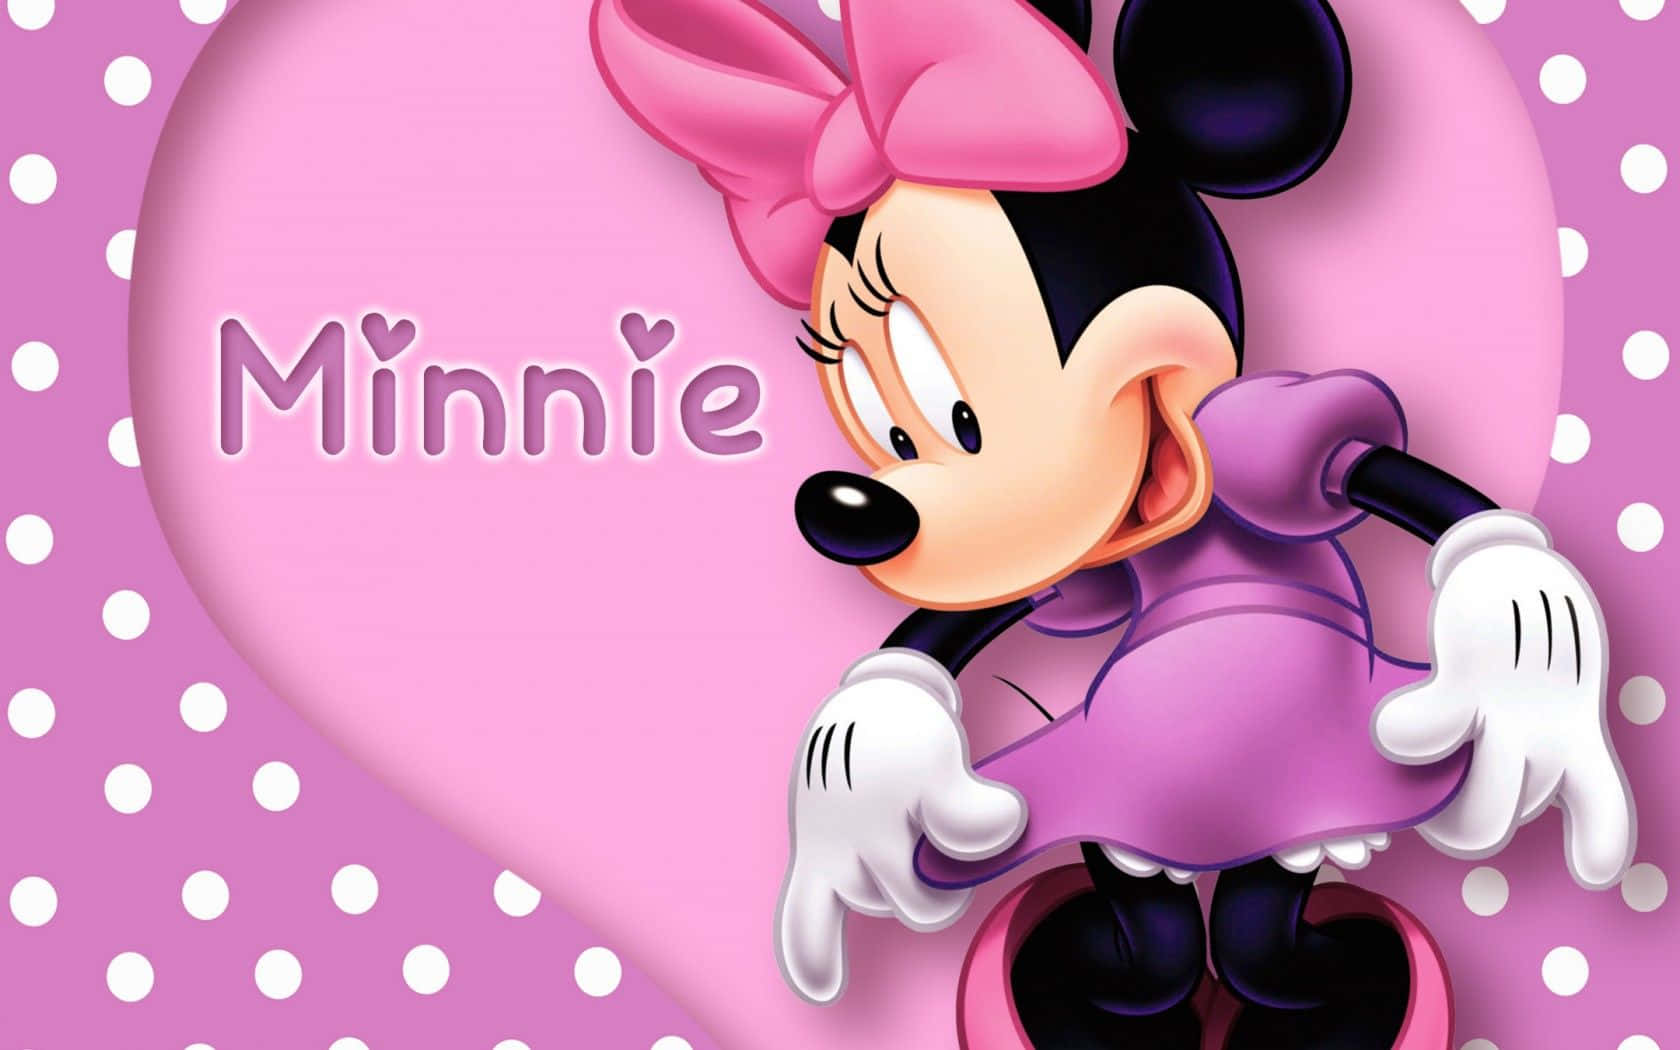 Minnie Mouse Greets You With A Smile